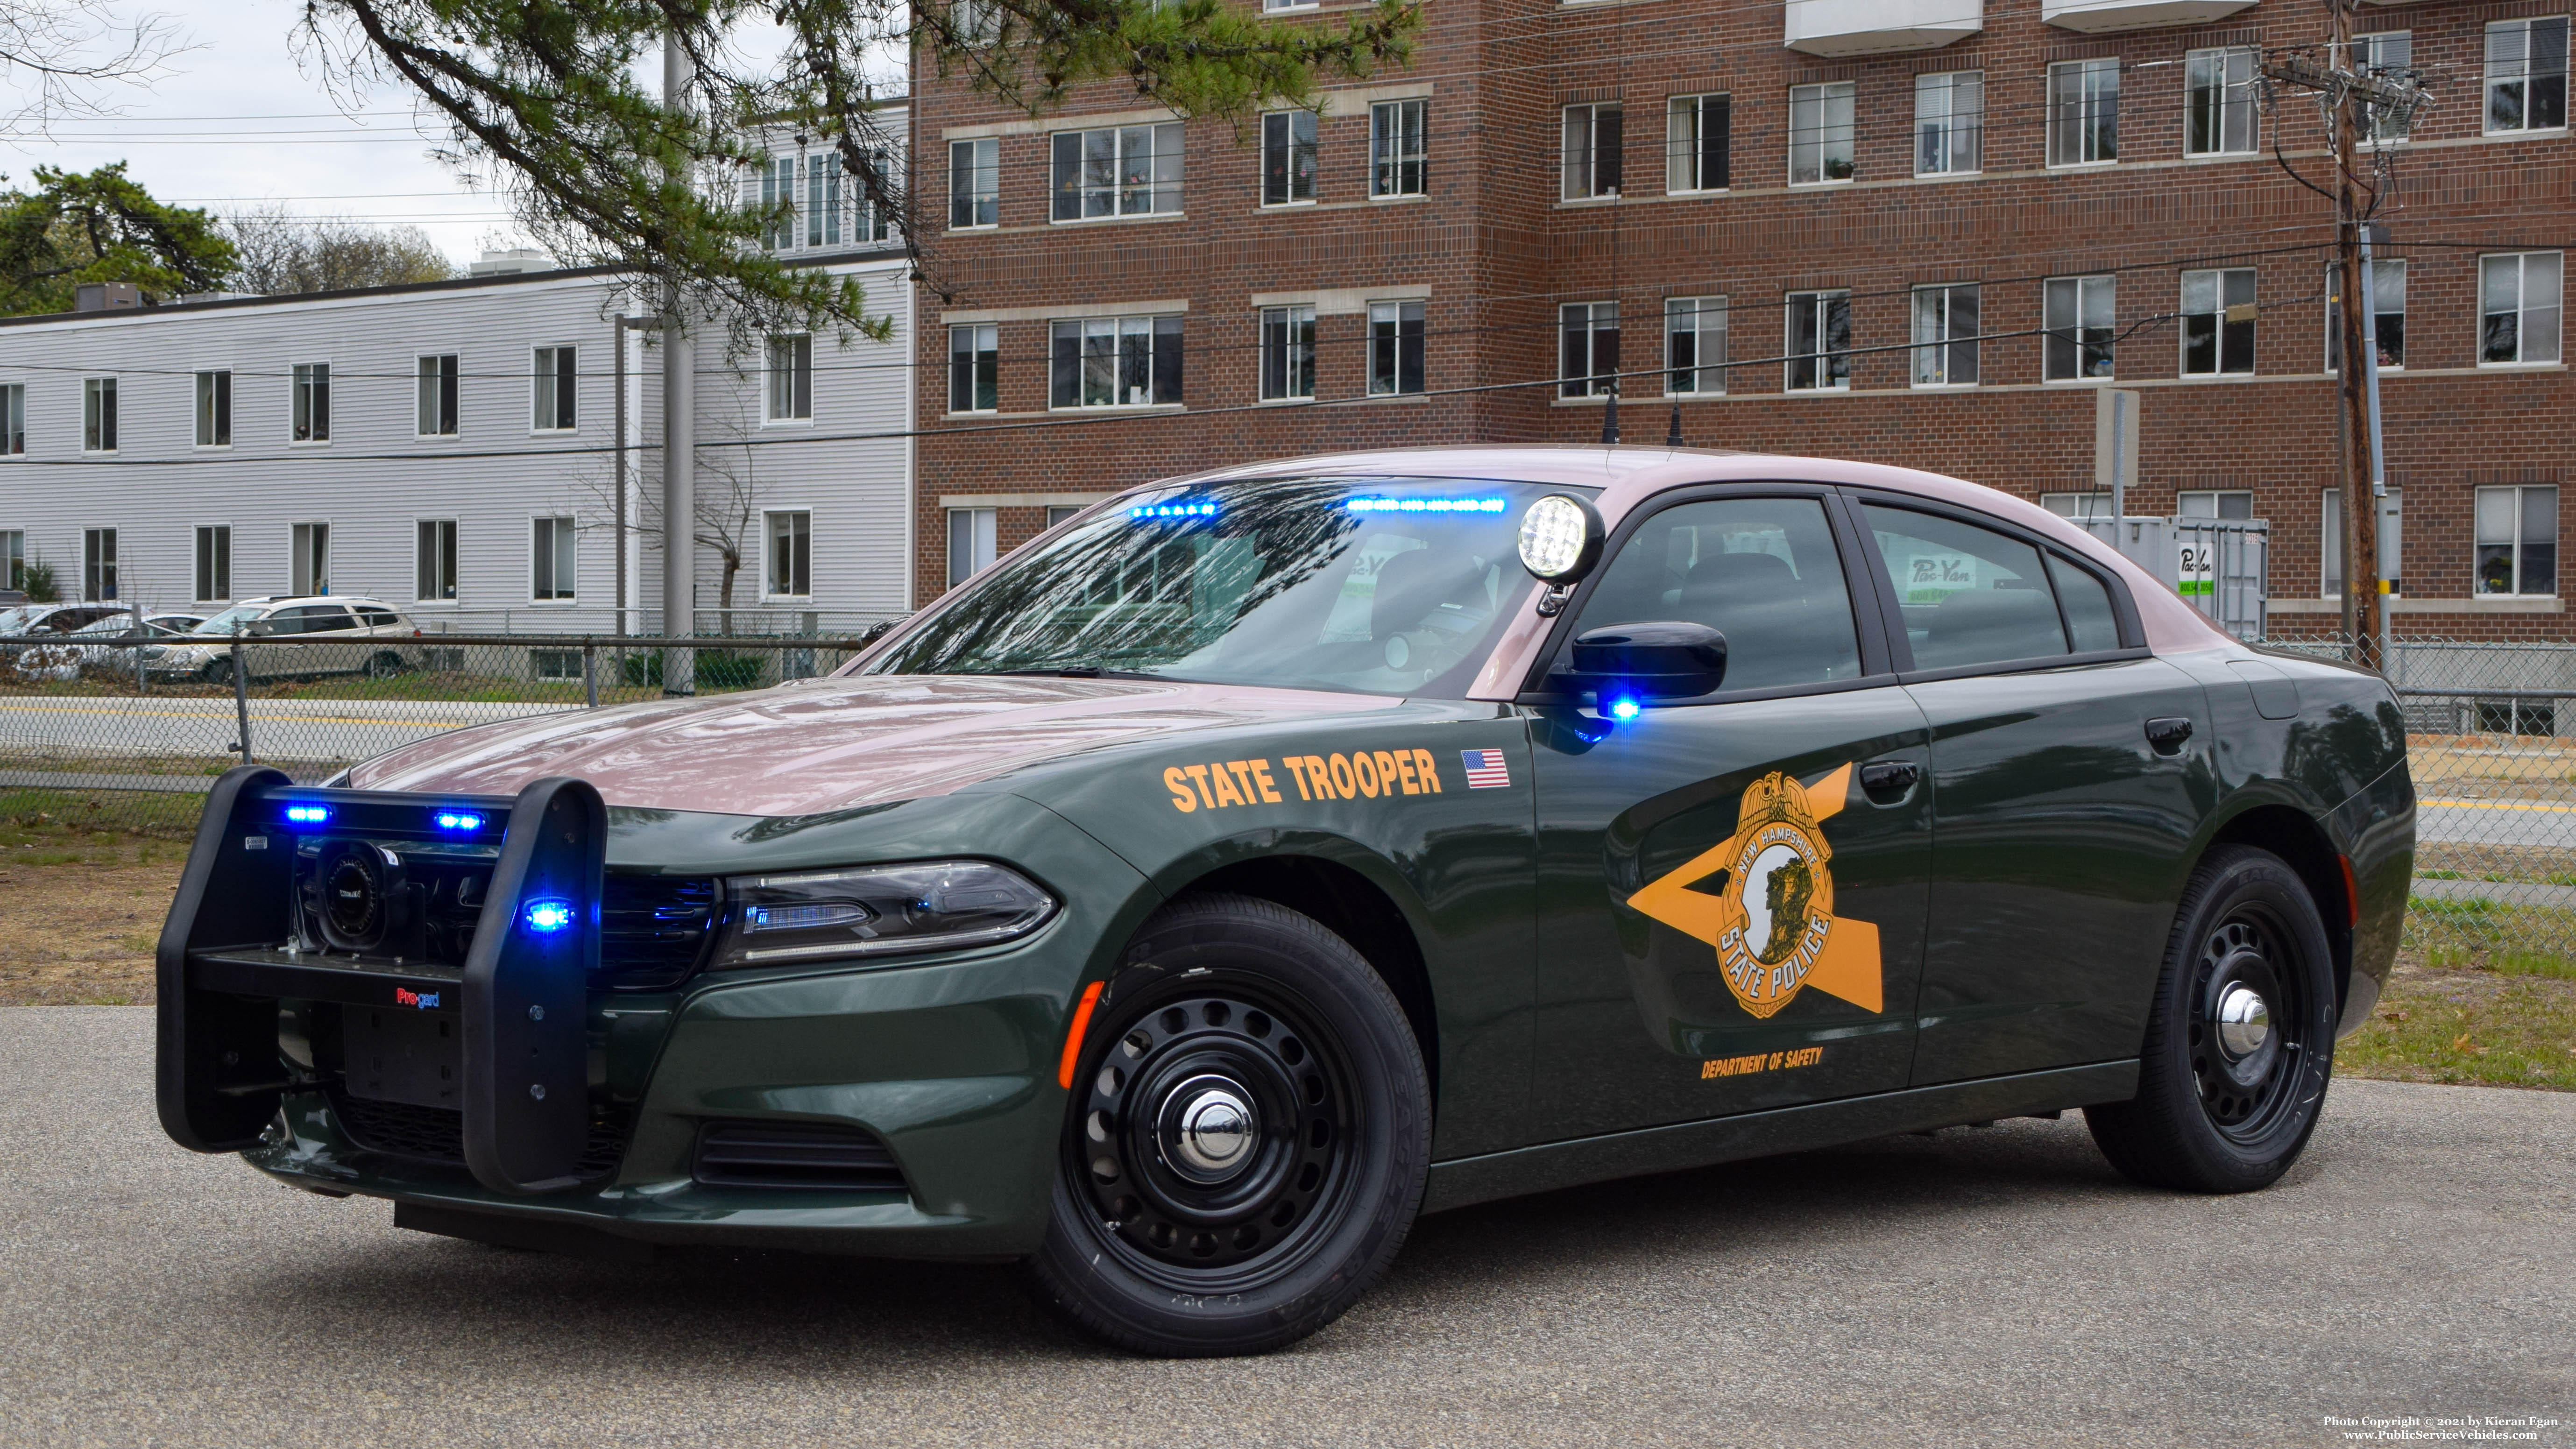 A photo  of New Hampshire State Police
            Cruiser 409, a 2020 Dodge Charger             taken by Kieran Egan